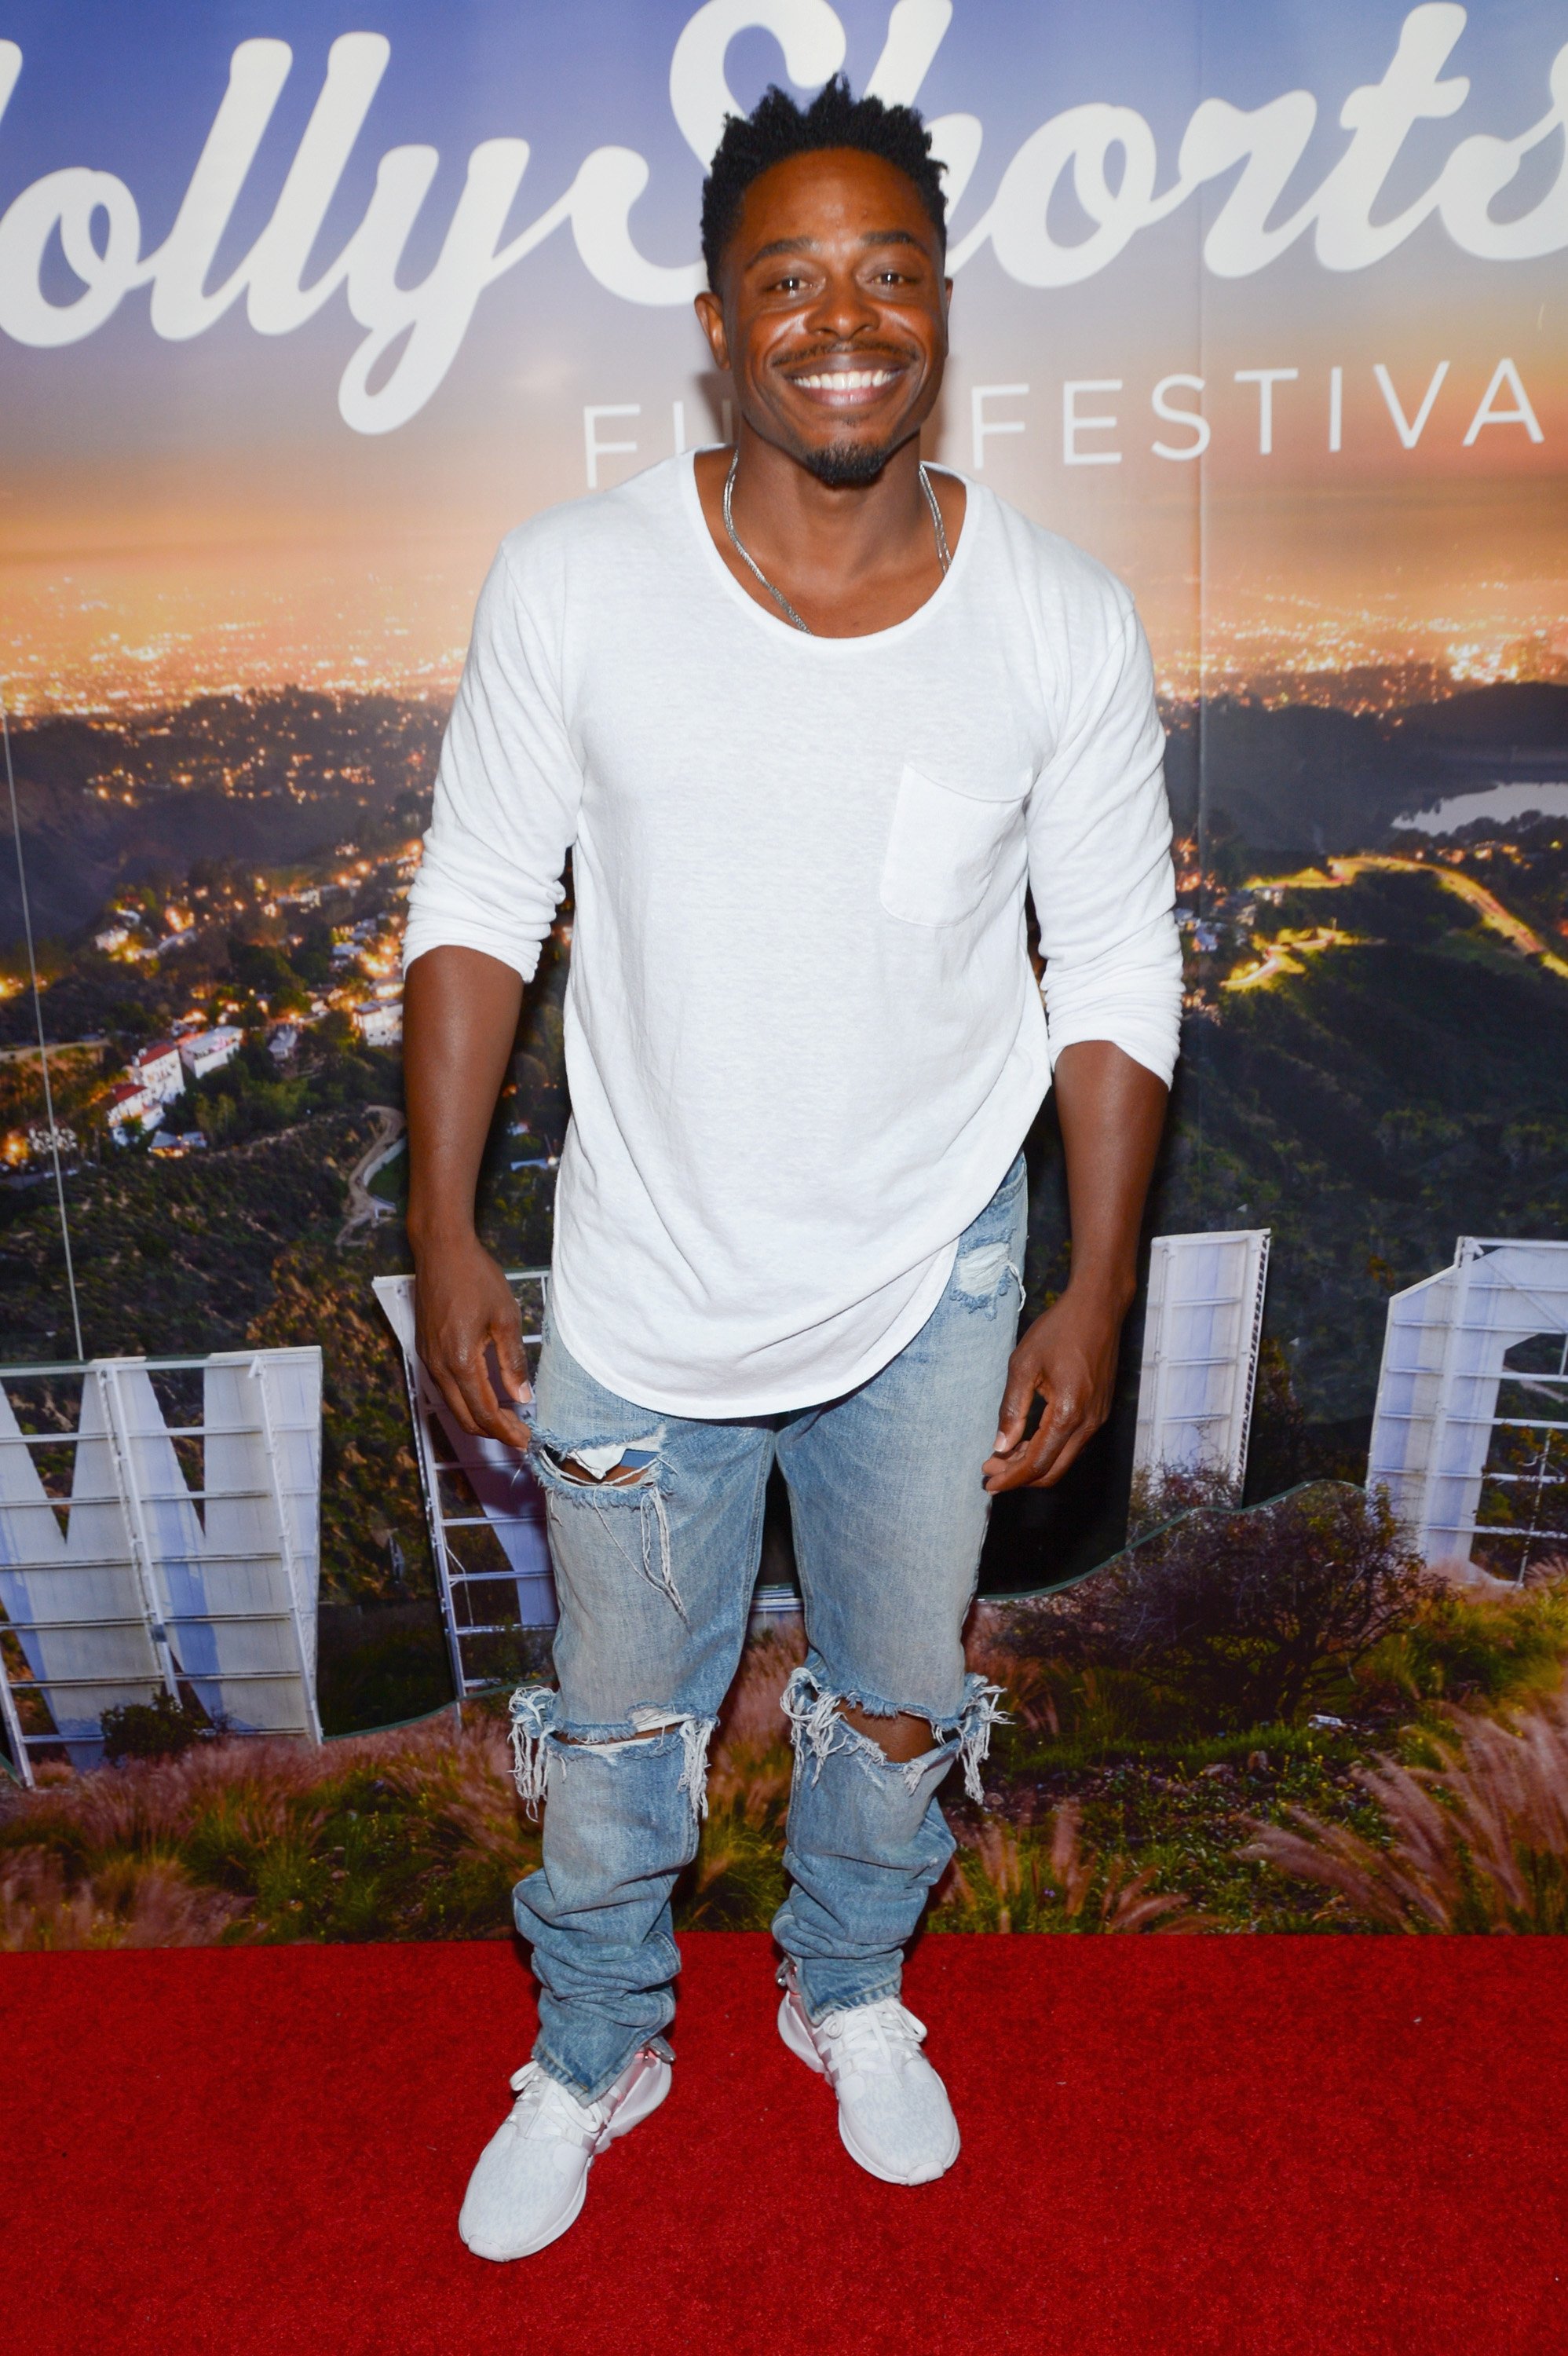 Kareem J. Grimes at the 2017 HollyShorts Film Festival on August 12, 2017, in Hollywood | Source: Getty Images